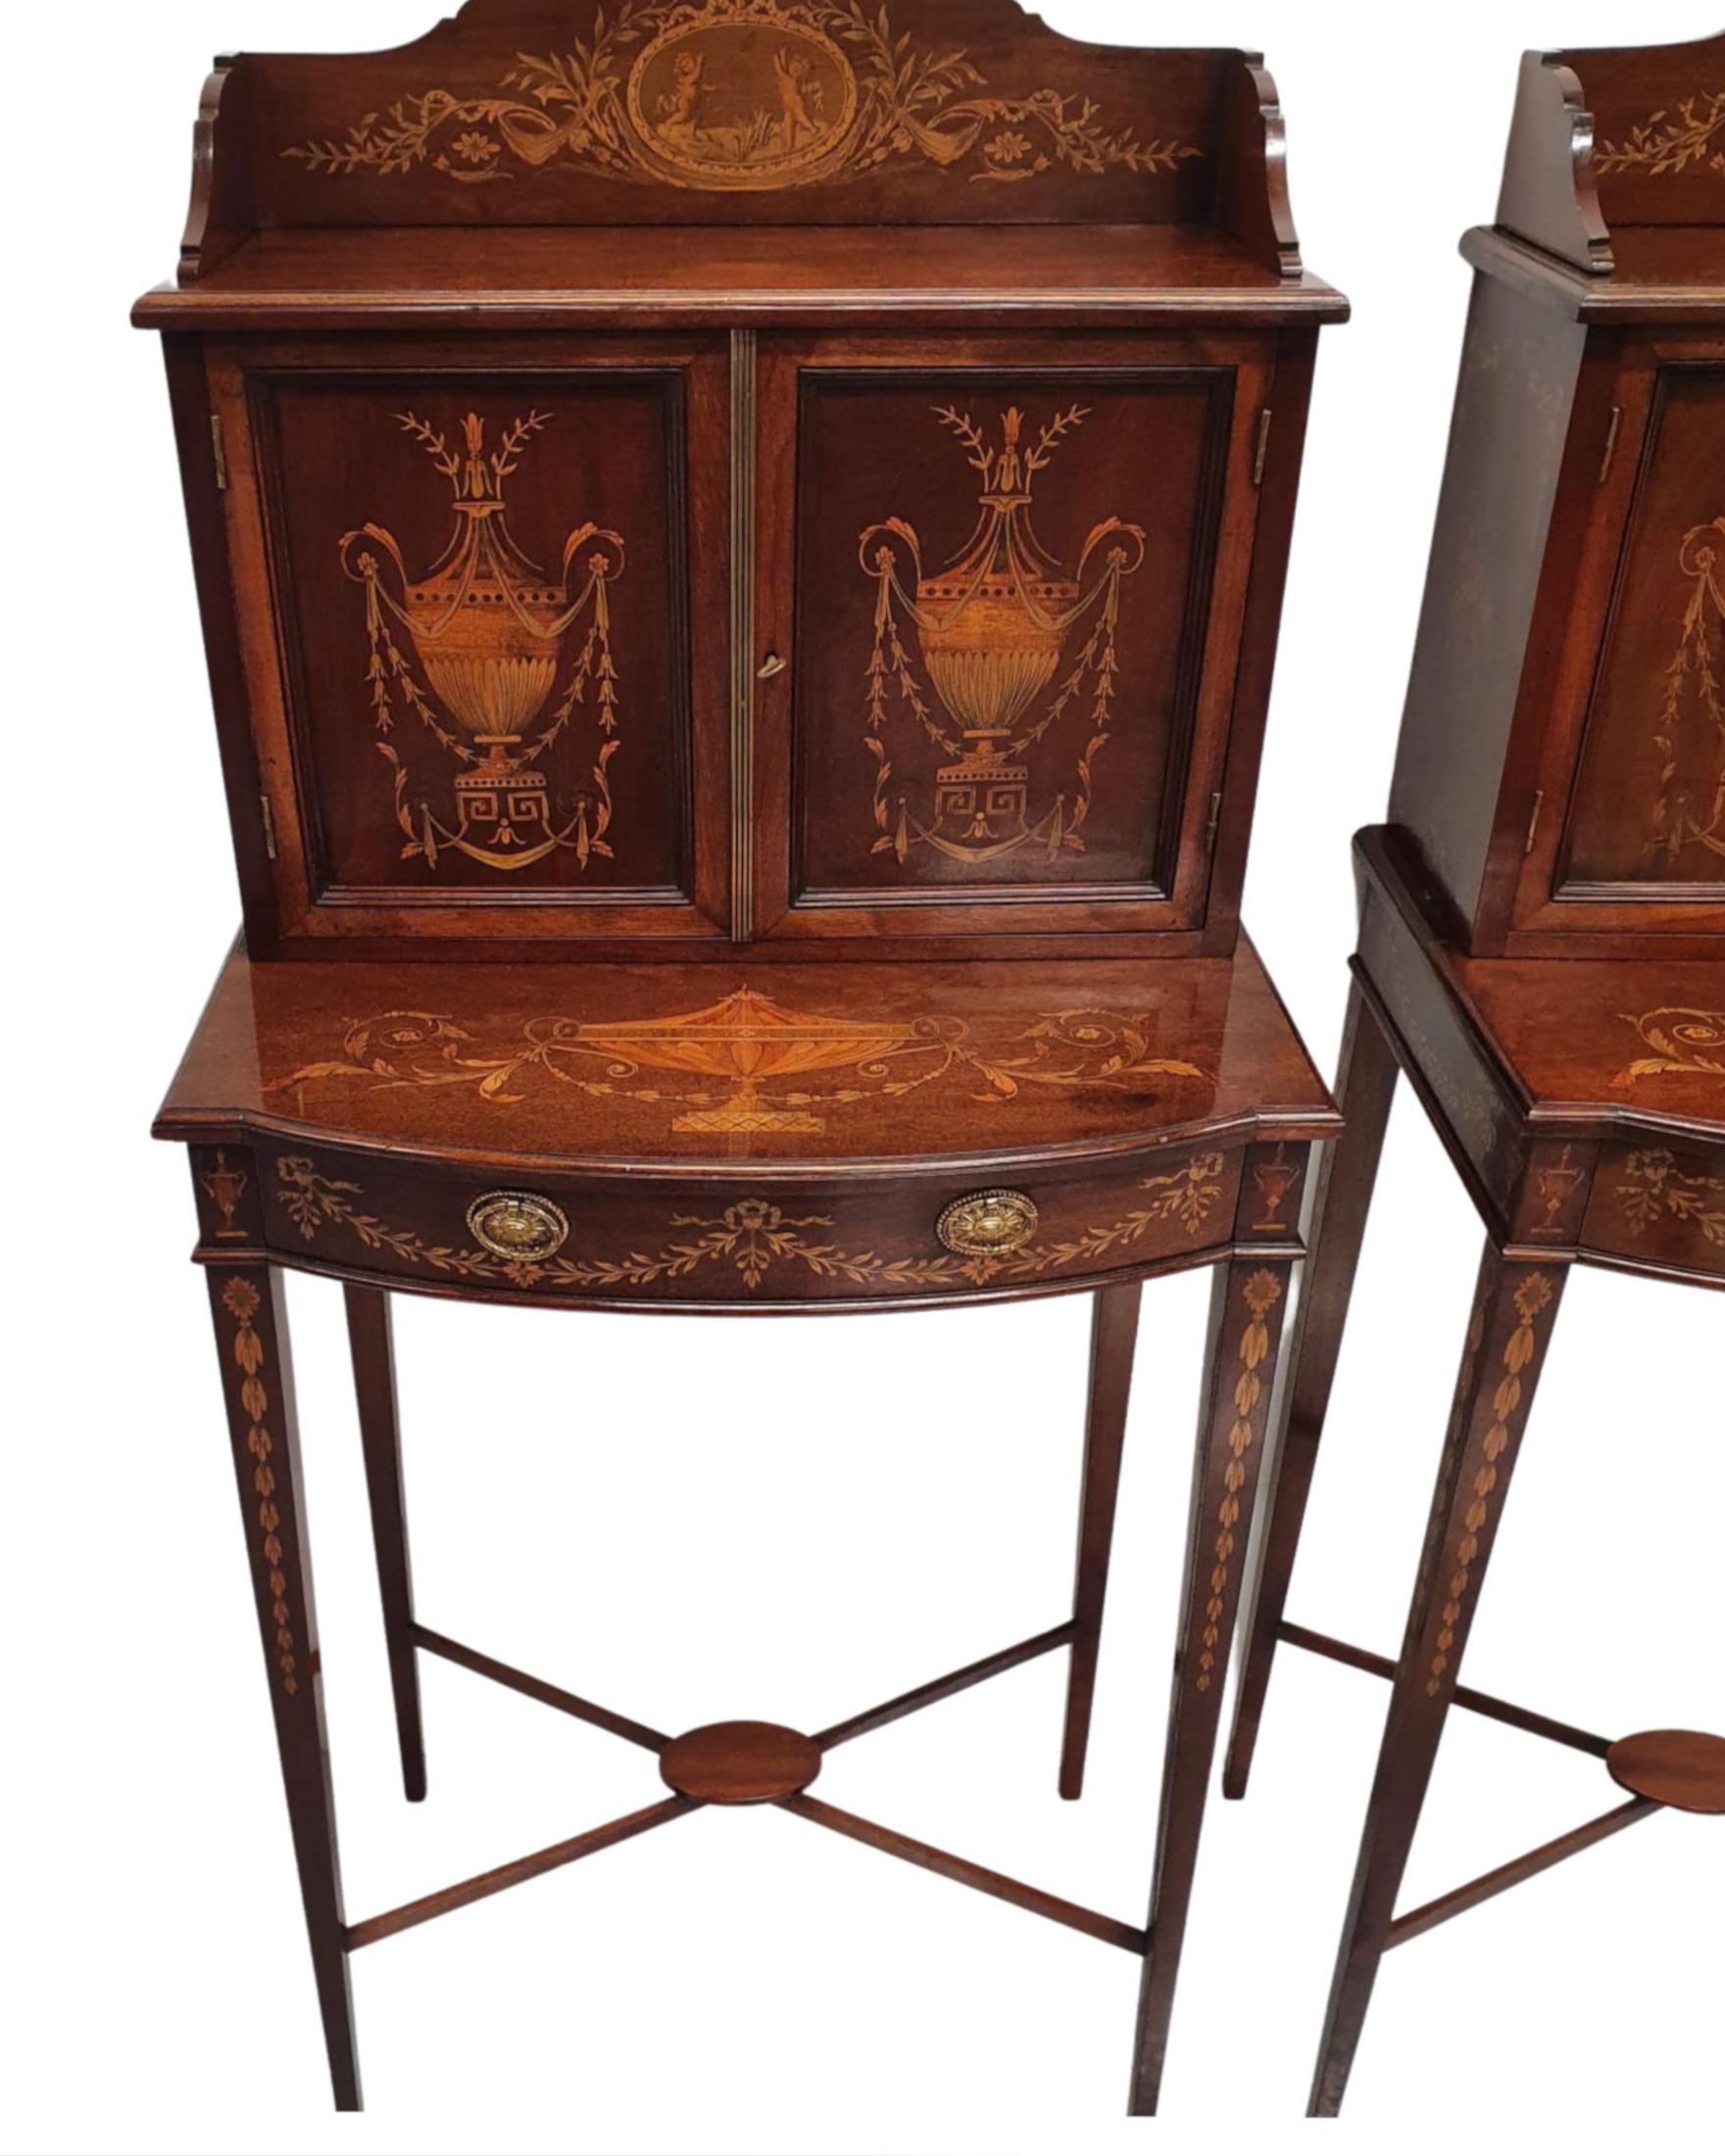  A Rare Pair of Exceptional Edwardian Cabinets Attributed to Edward and Roberts For Sale 1